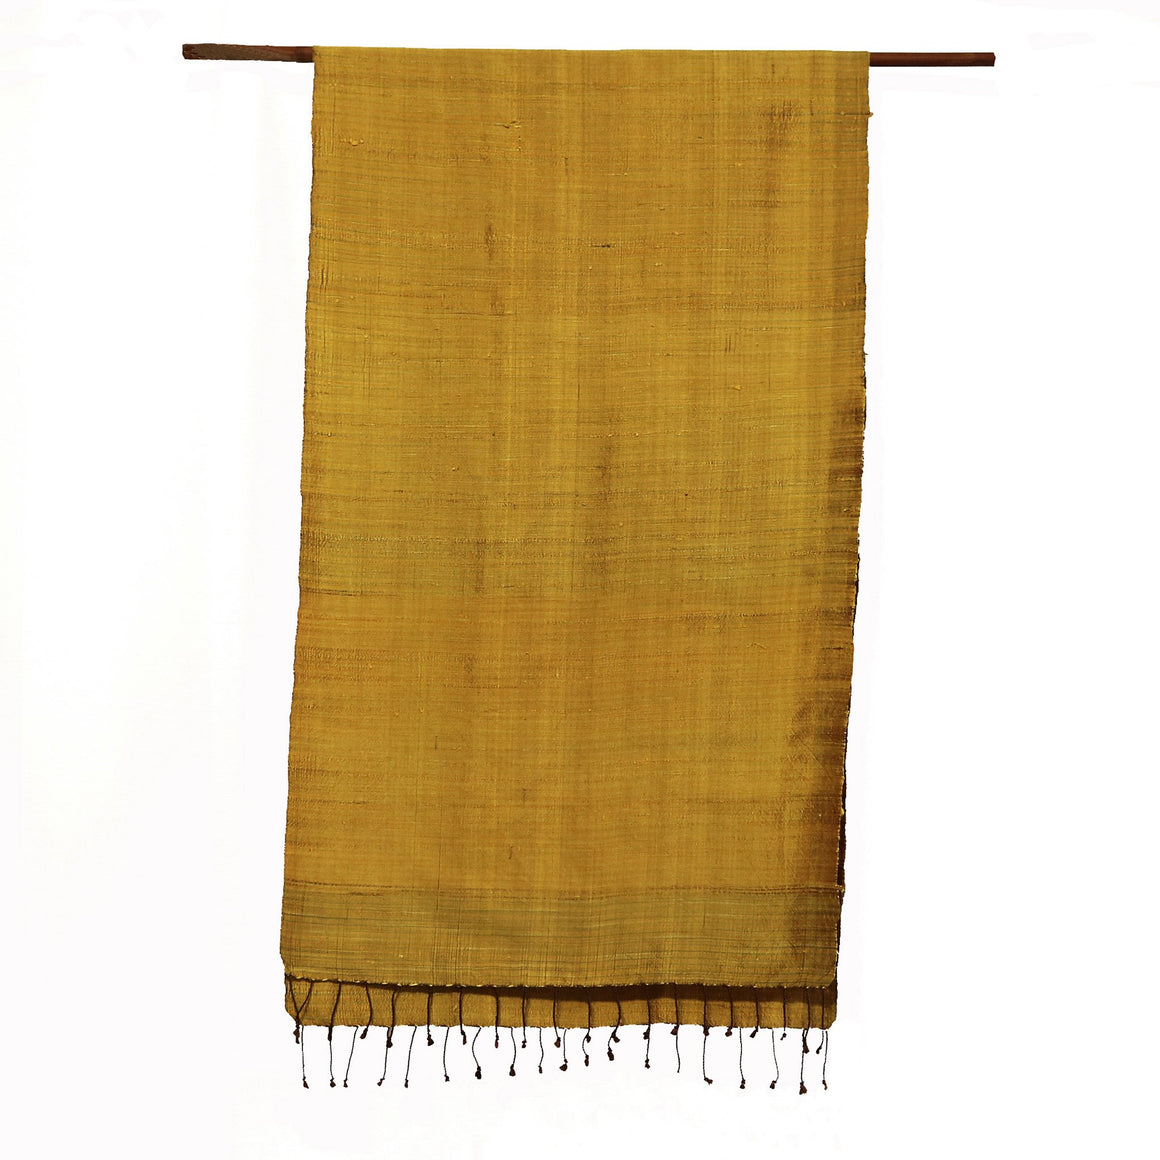 GOLDEN DREAMS HAND WOVEN 100% RAW SILK LAOTIAN SCARF SCARVES ZENZOEY JEWELRY & ACCESSORIES 